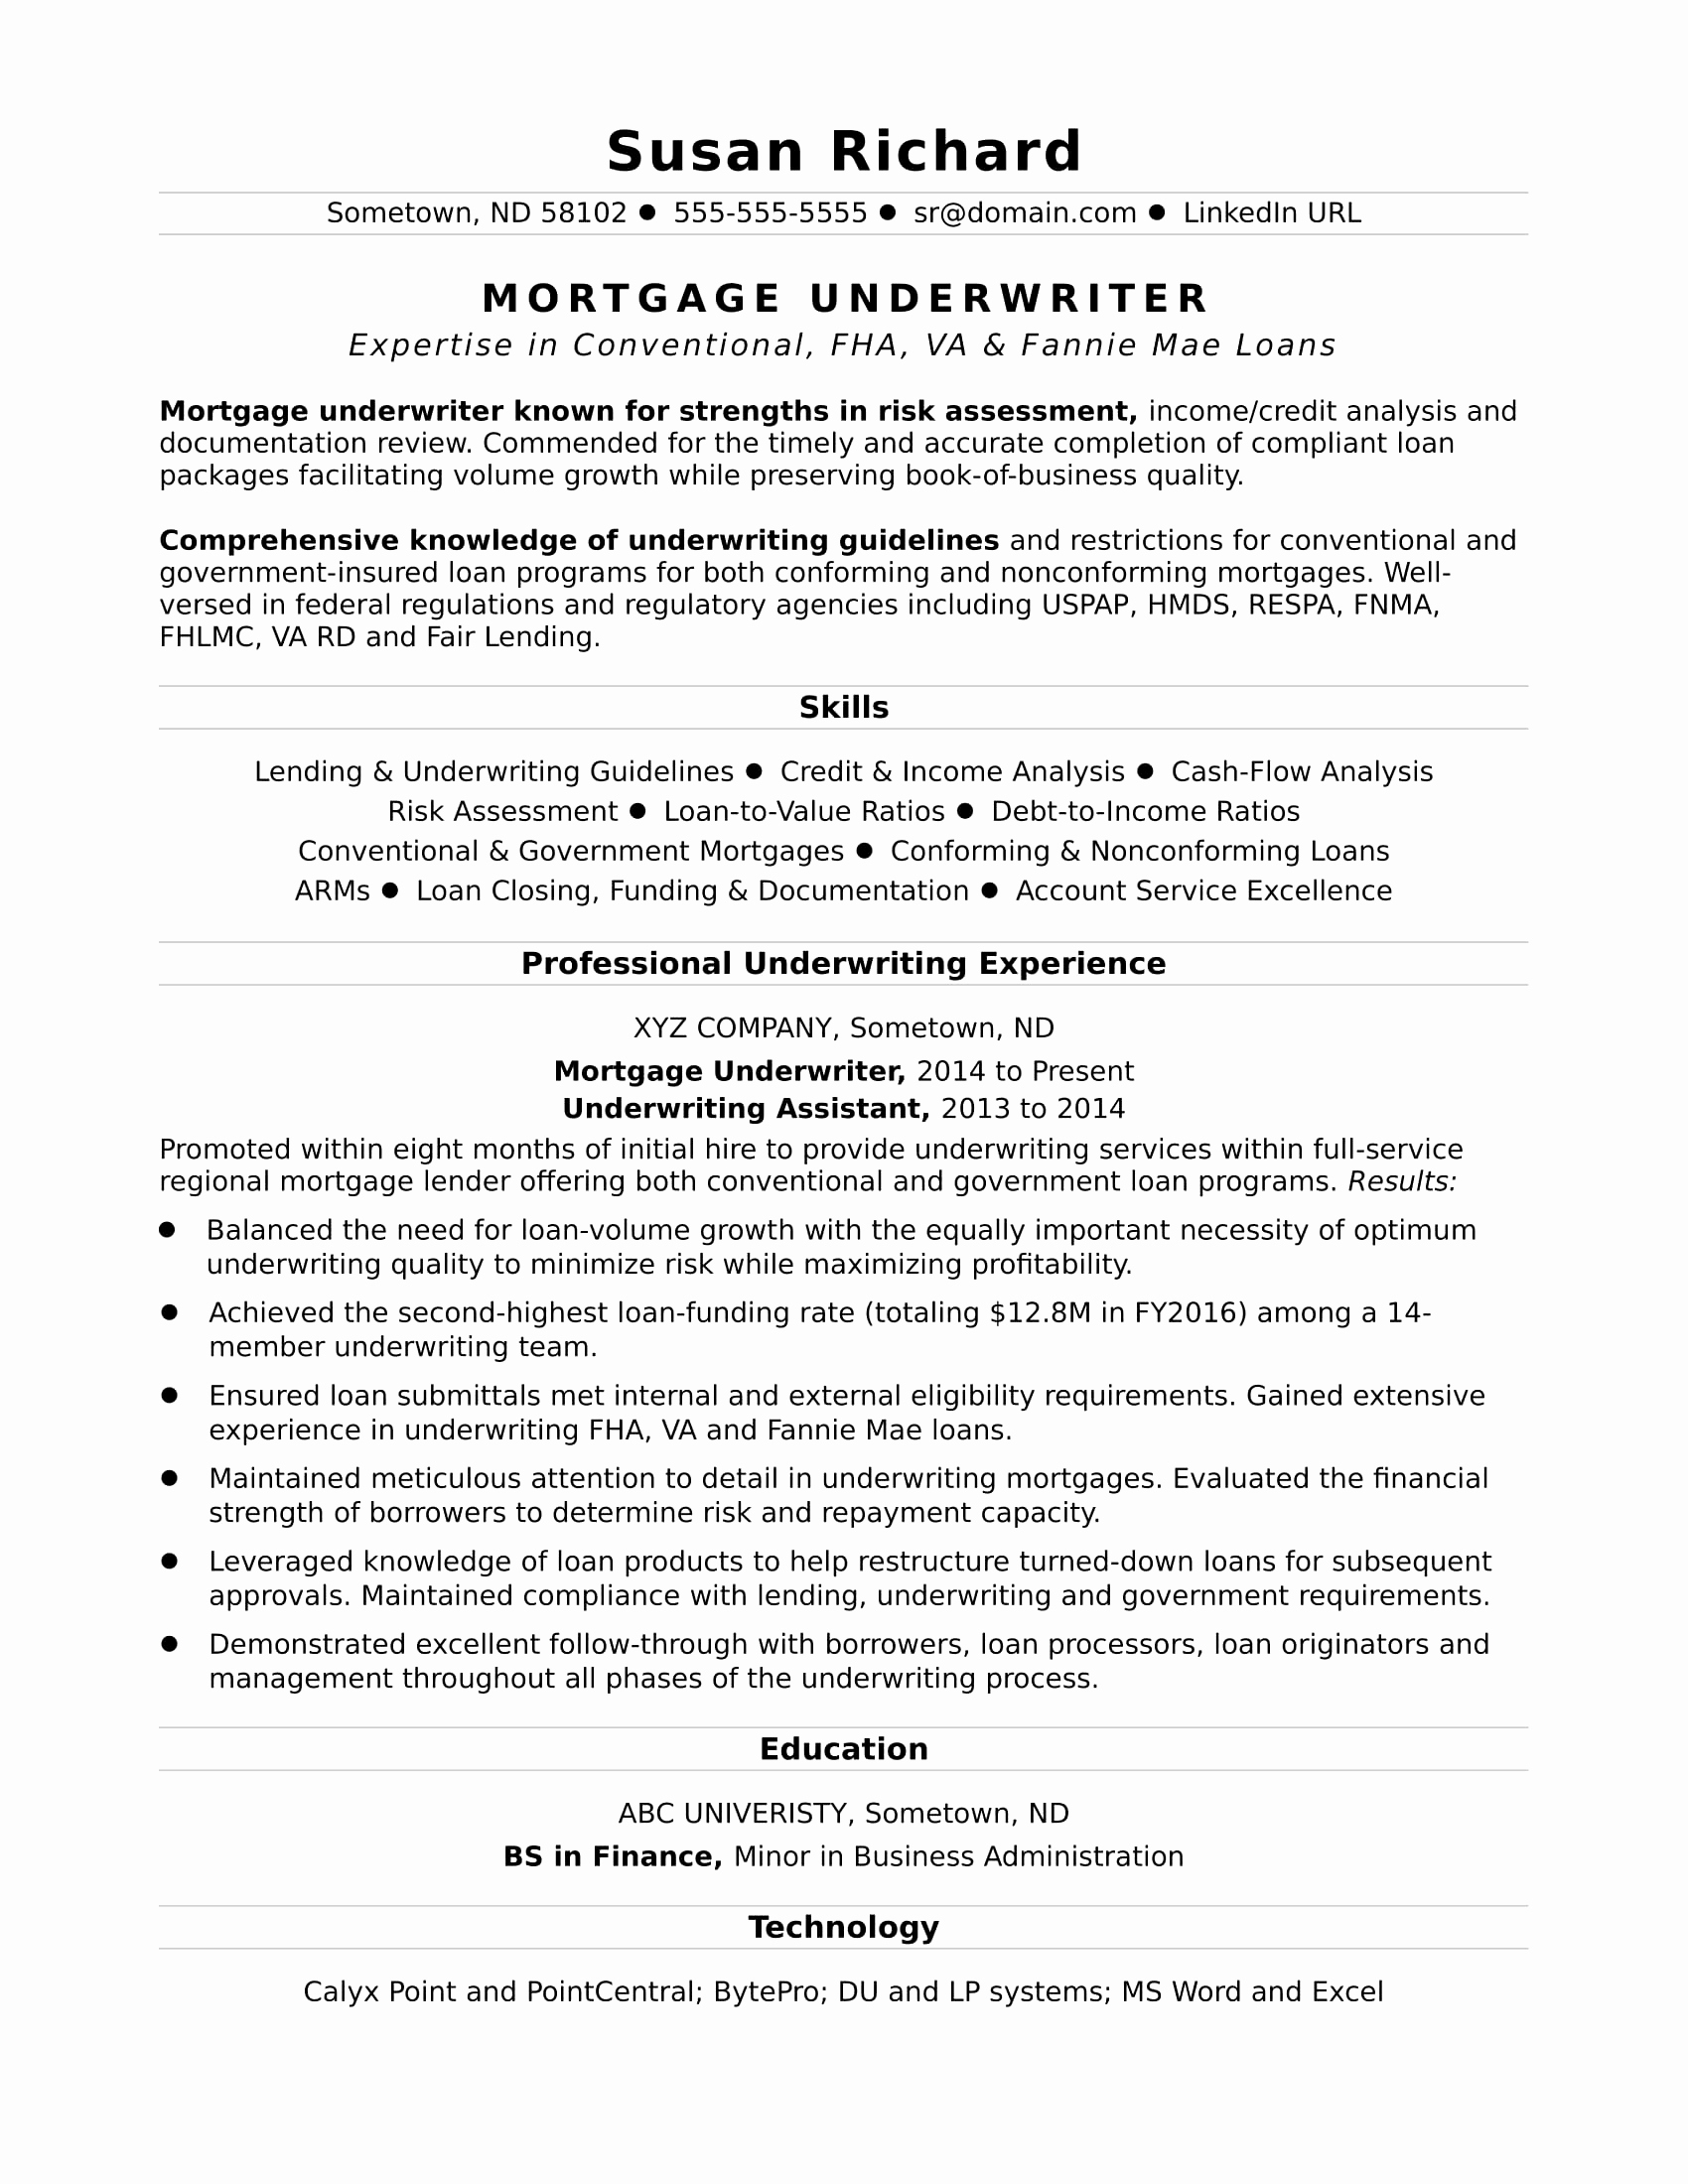 Cover Letter Template Download - Free Cover Letter Template Download Unique Free Download Cover